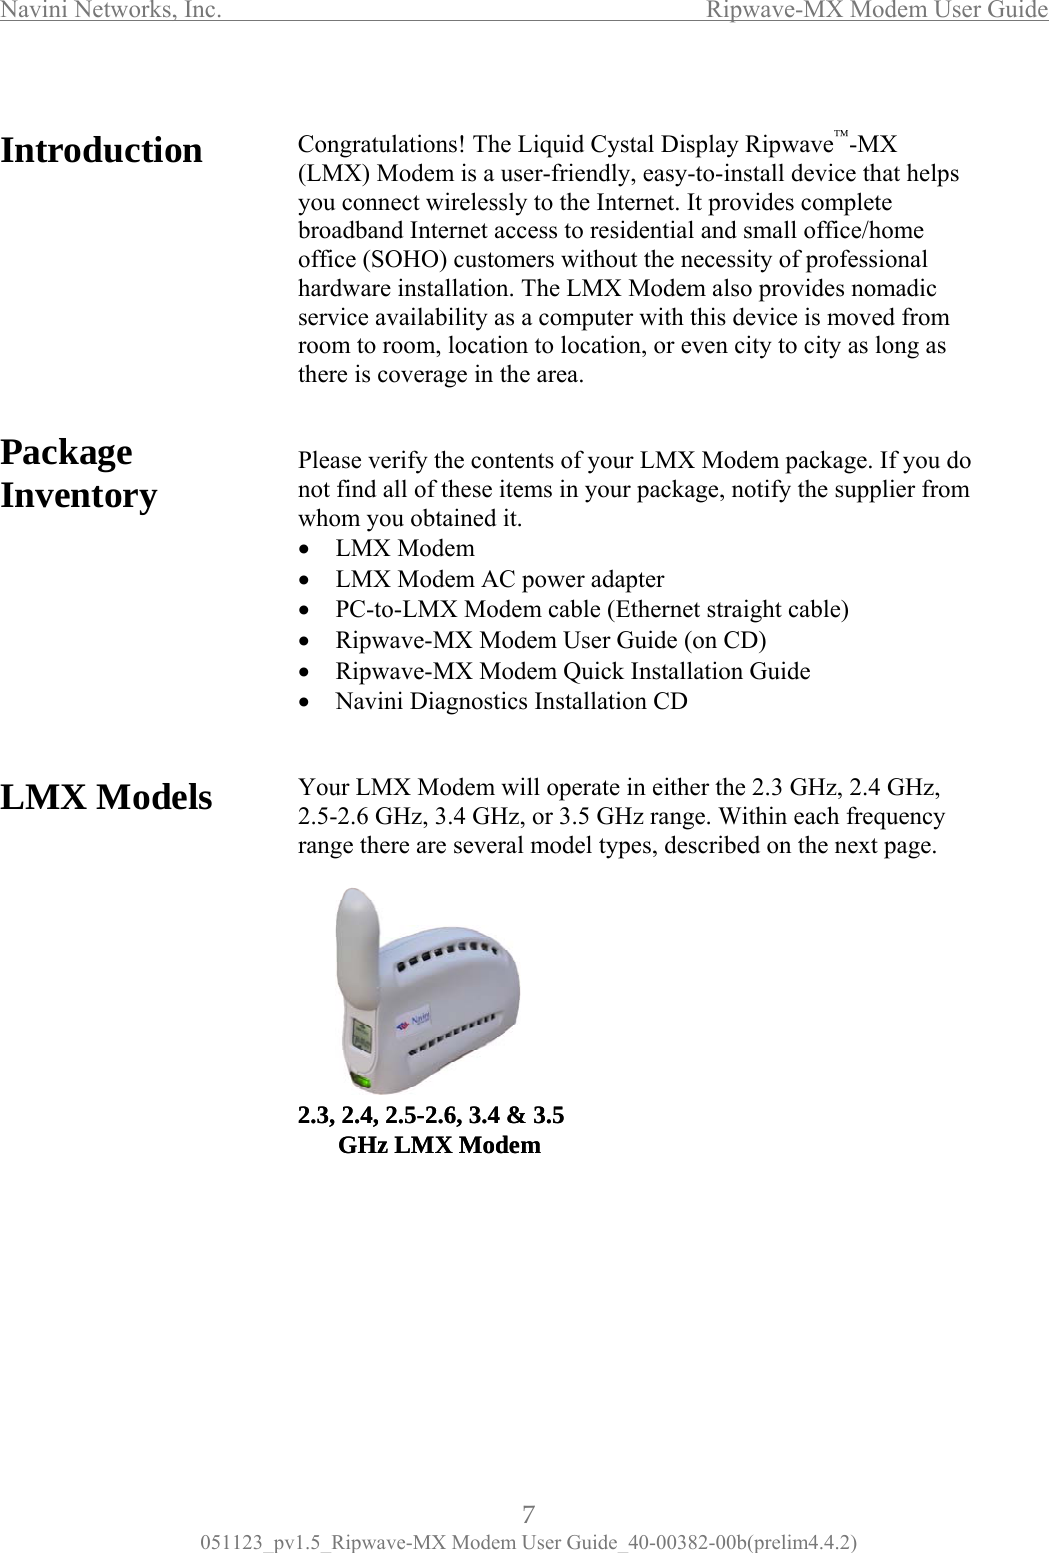 Navini Networks, Inc.                  Ripwave-MX Modem User Guide  Introduction  Congratul(LMX) M         PackInve       LMX Mo                      ations! The Liquid Cystal Display Ripwave™-MX odem is a user-friendly, easy-to-install device that helps you connect wirelessly to the Internet. It provides complete broadband Internet access to residential and small office/home office (SOHO) customers without the necessity of professional  notify the supplier from whom you obtained it. dapter Ethernet straight cable) e (on CD)  2.5-2.6, 3.4 &amp; 3.5age tory hardware installation. The LMX Modem also provides nomadic service availability as a computer with this device is moved from room to room, location to location, or even city to city as long as there is coverage in the area.   Please verify the contents of your LMX Modem package. If you do not find all of these items in your package,n•  LMX Modem • • LMX Modem AC power aPC-to-LMX Modem cable (•  Ripwave-MX Modem User Guid•   Ripwave-MX Modem Quick Installation Guide •  Navini Diagnostics Installation CD dels  Your LMX Modem will operate in either the 2.3 GHz, 2.4 GHz,  2.5-2.6 GHz, 3.4 GHz, or 3.5 GHz range. Within each frequency range there are several model types, described on the next page.   2.3, 2.4,GHz LMX Modem2.3, 2.4, 2.5-2.6, 3.4 &amp; 3.5GHz LMX Modem        7 051123_pv1.5_Ripwave-MX Modem User Guide_40-00382-00b(prelim4.4.2) 